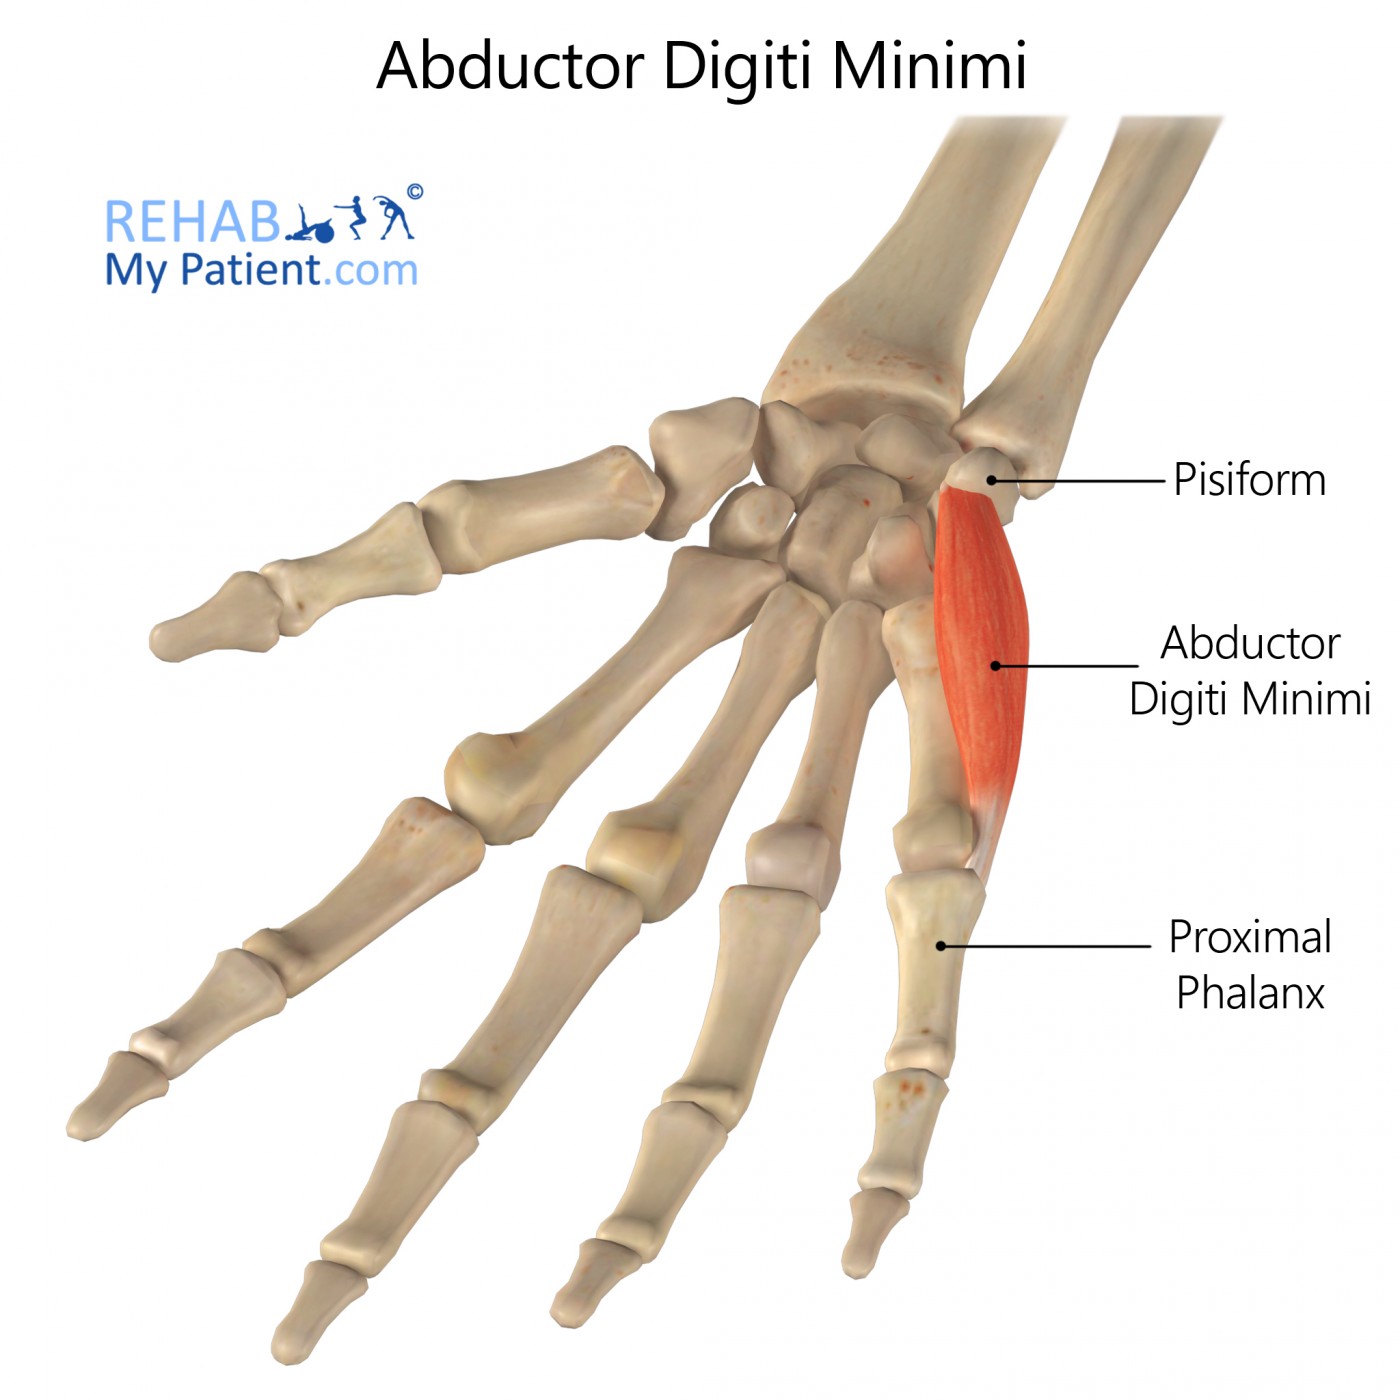 An Atypical Injury Distal to the Palmar Arch